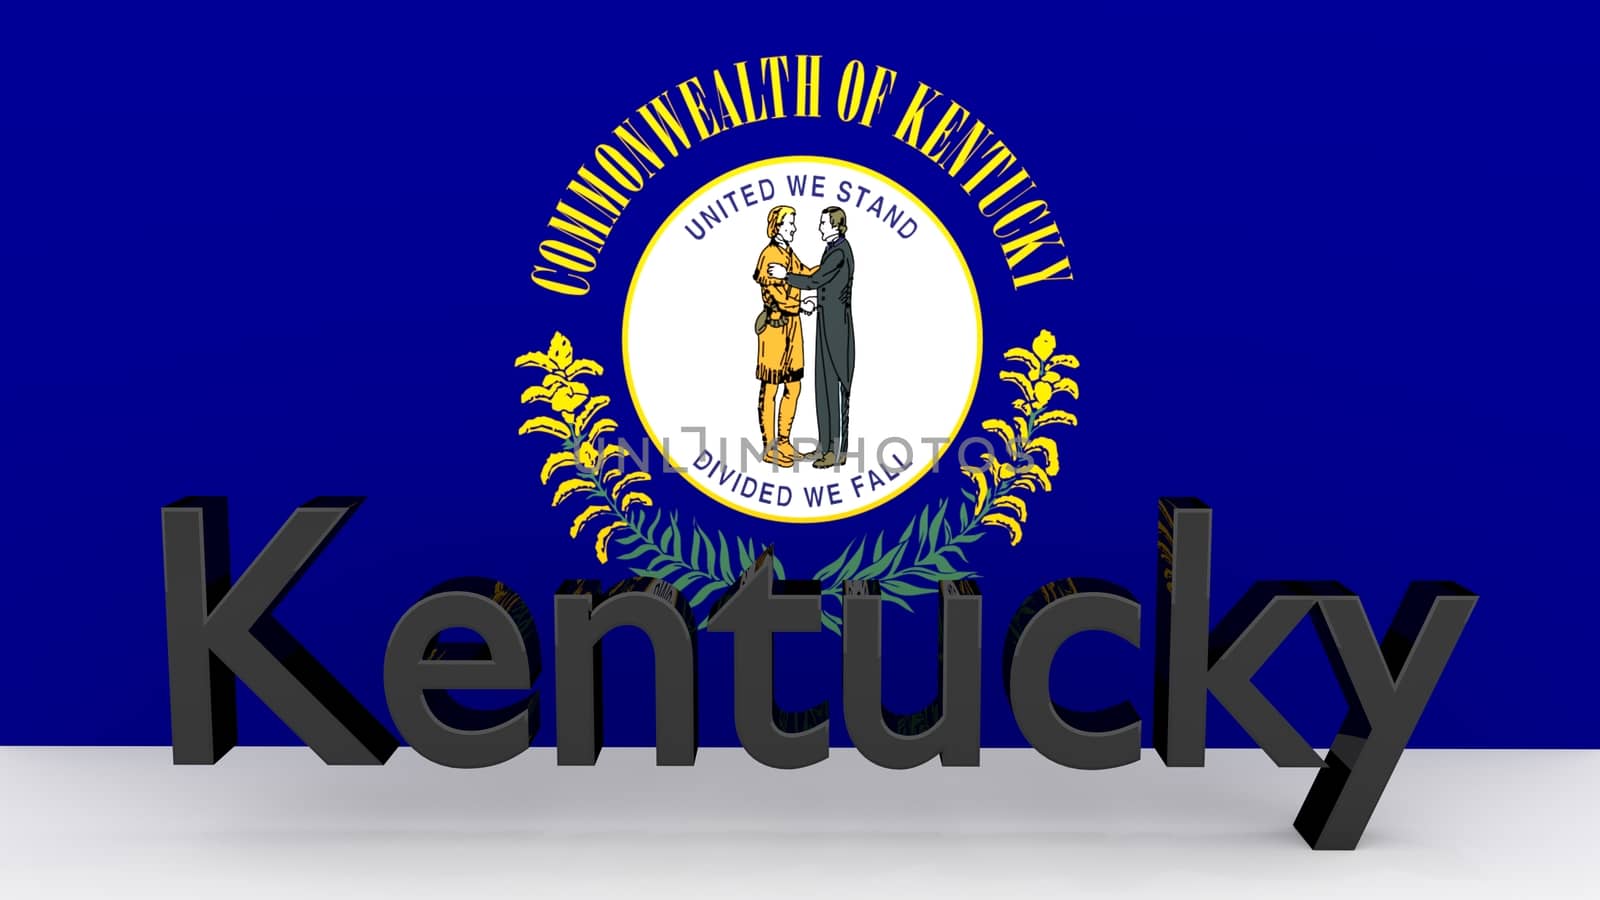 US state Kentucky, metal name in front of flag by MarkDw